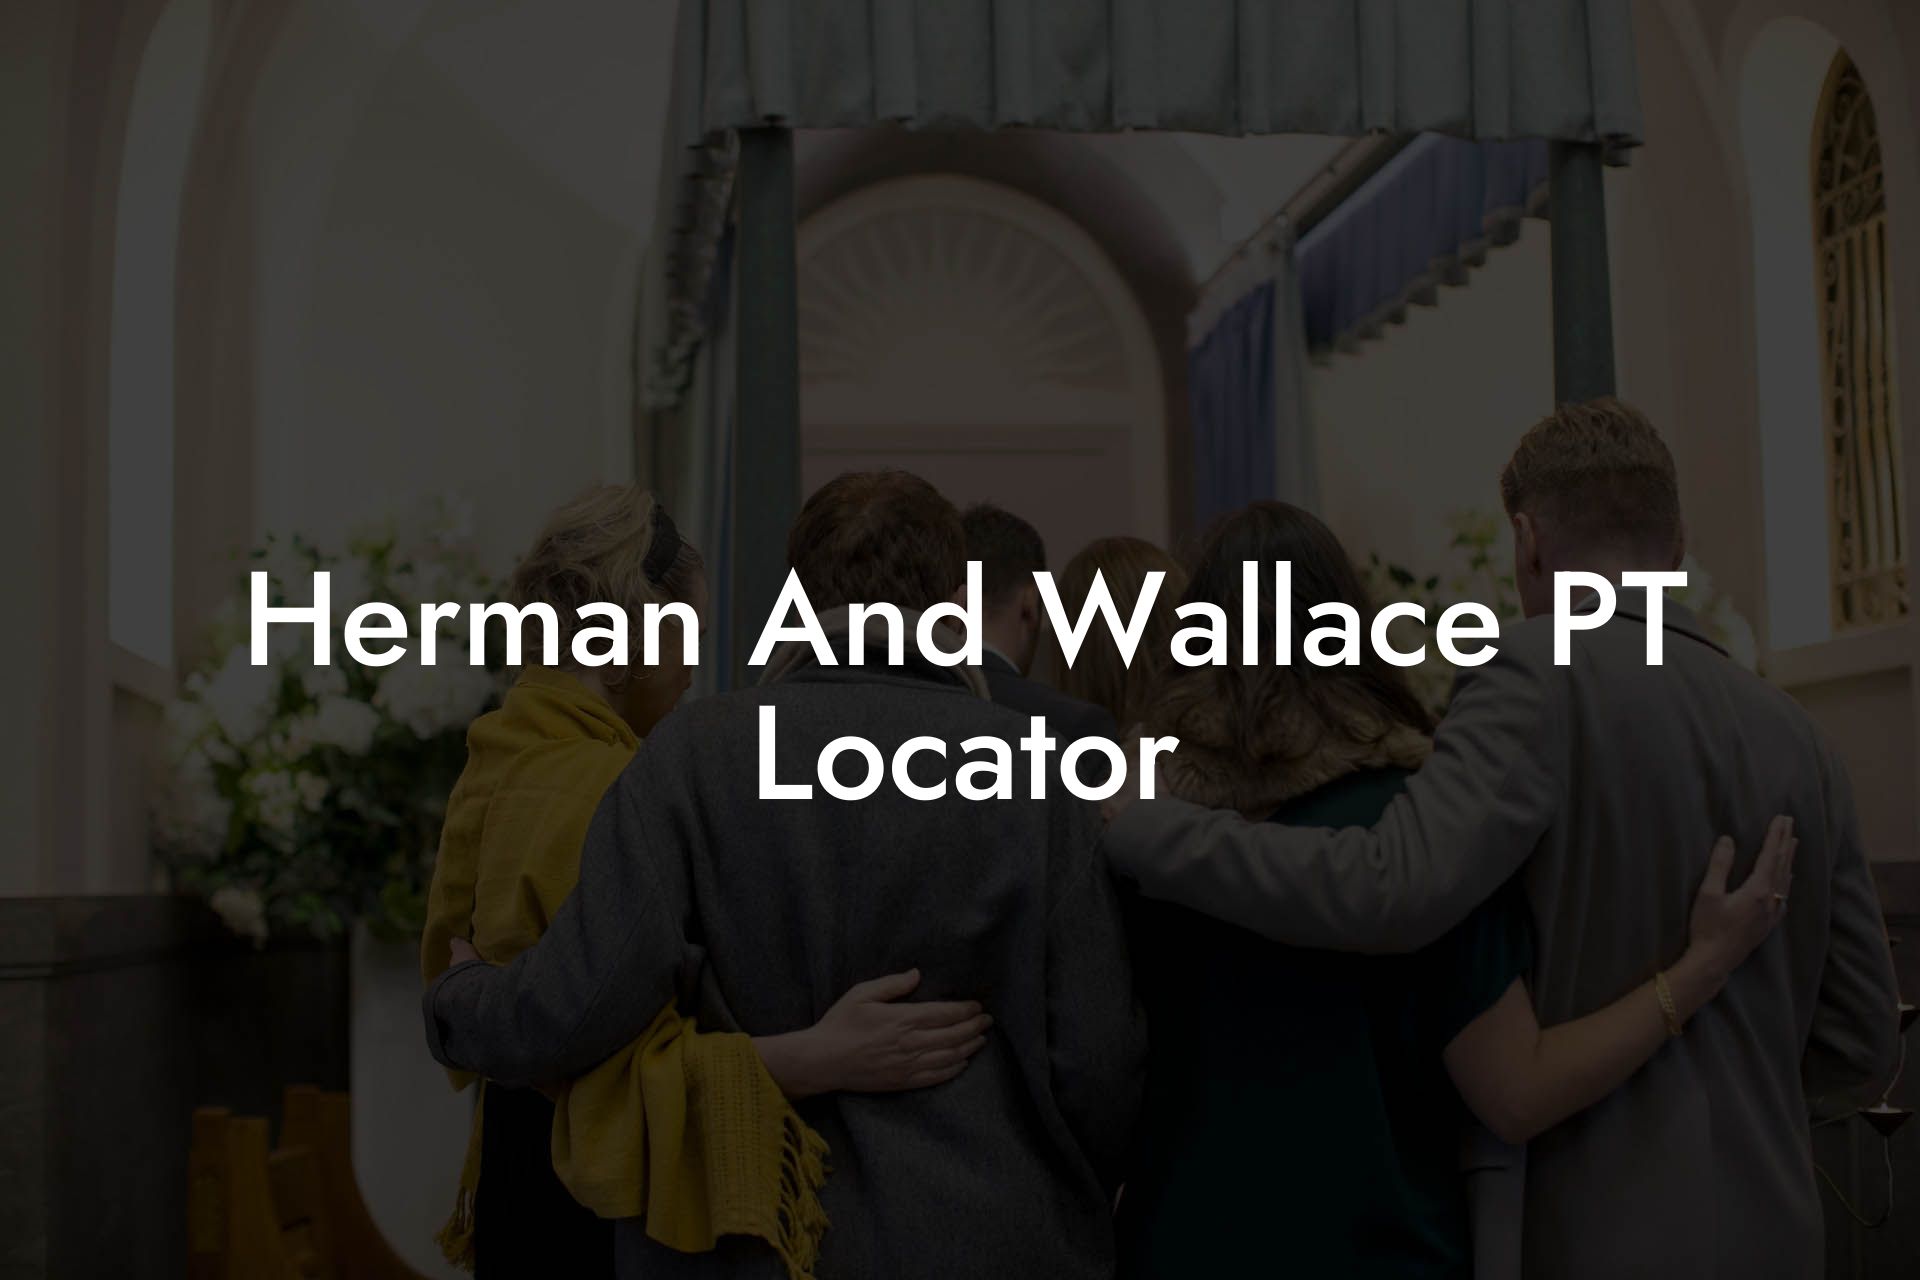 Herman And Wallace PT Locator